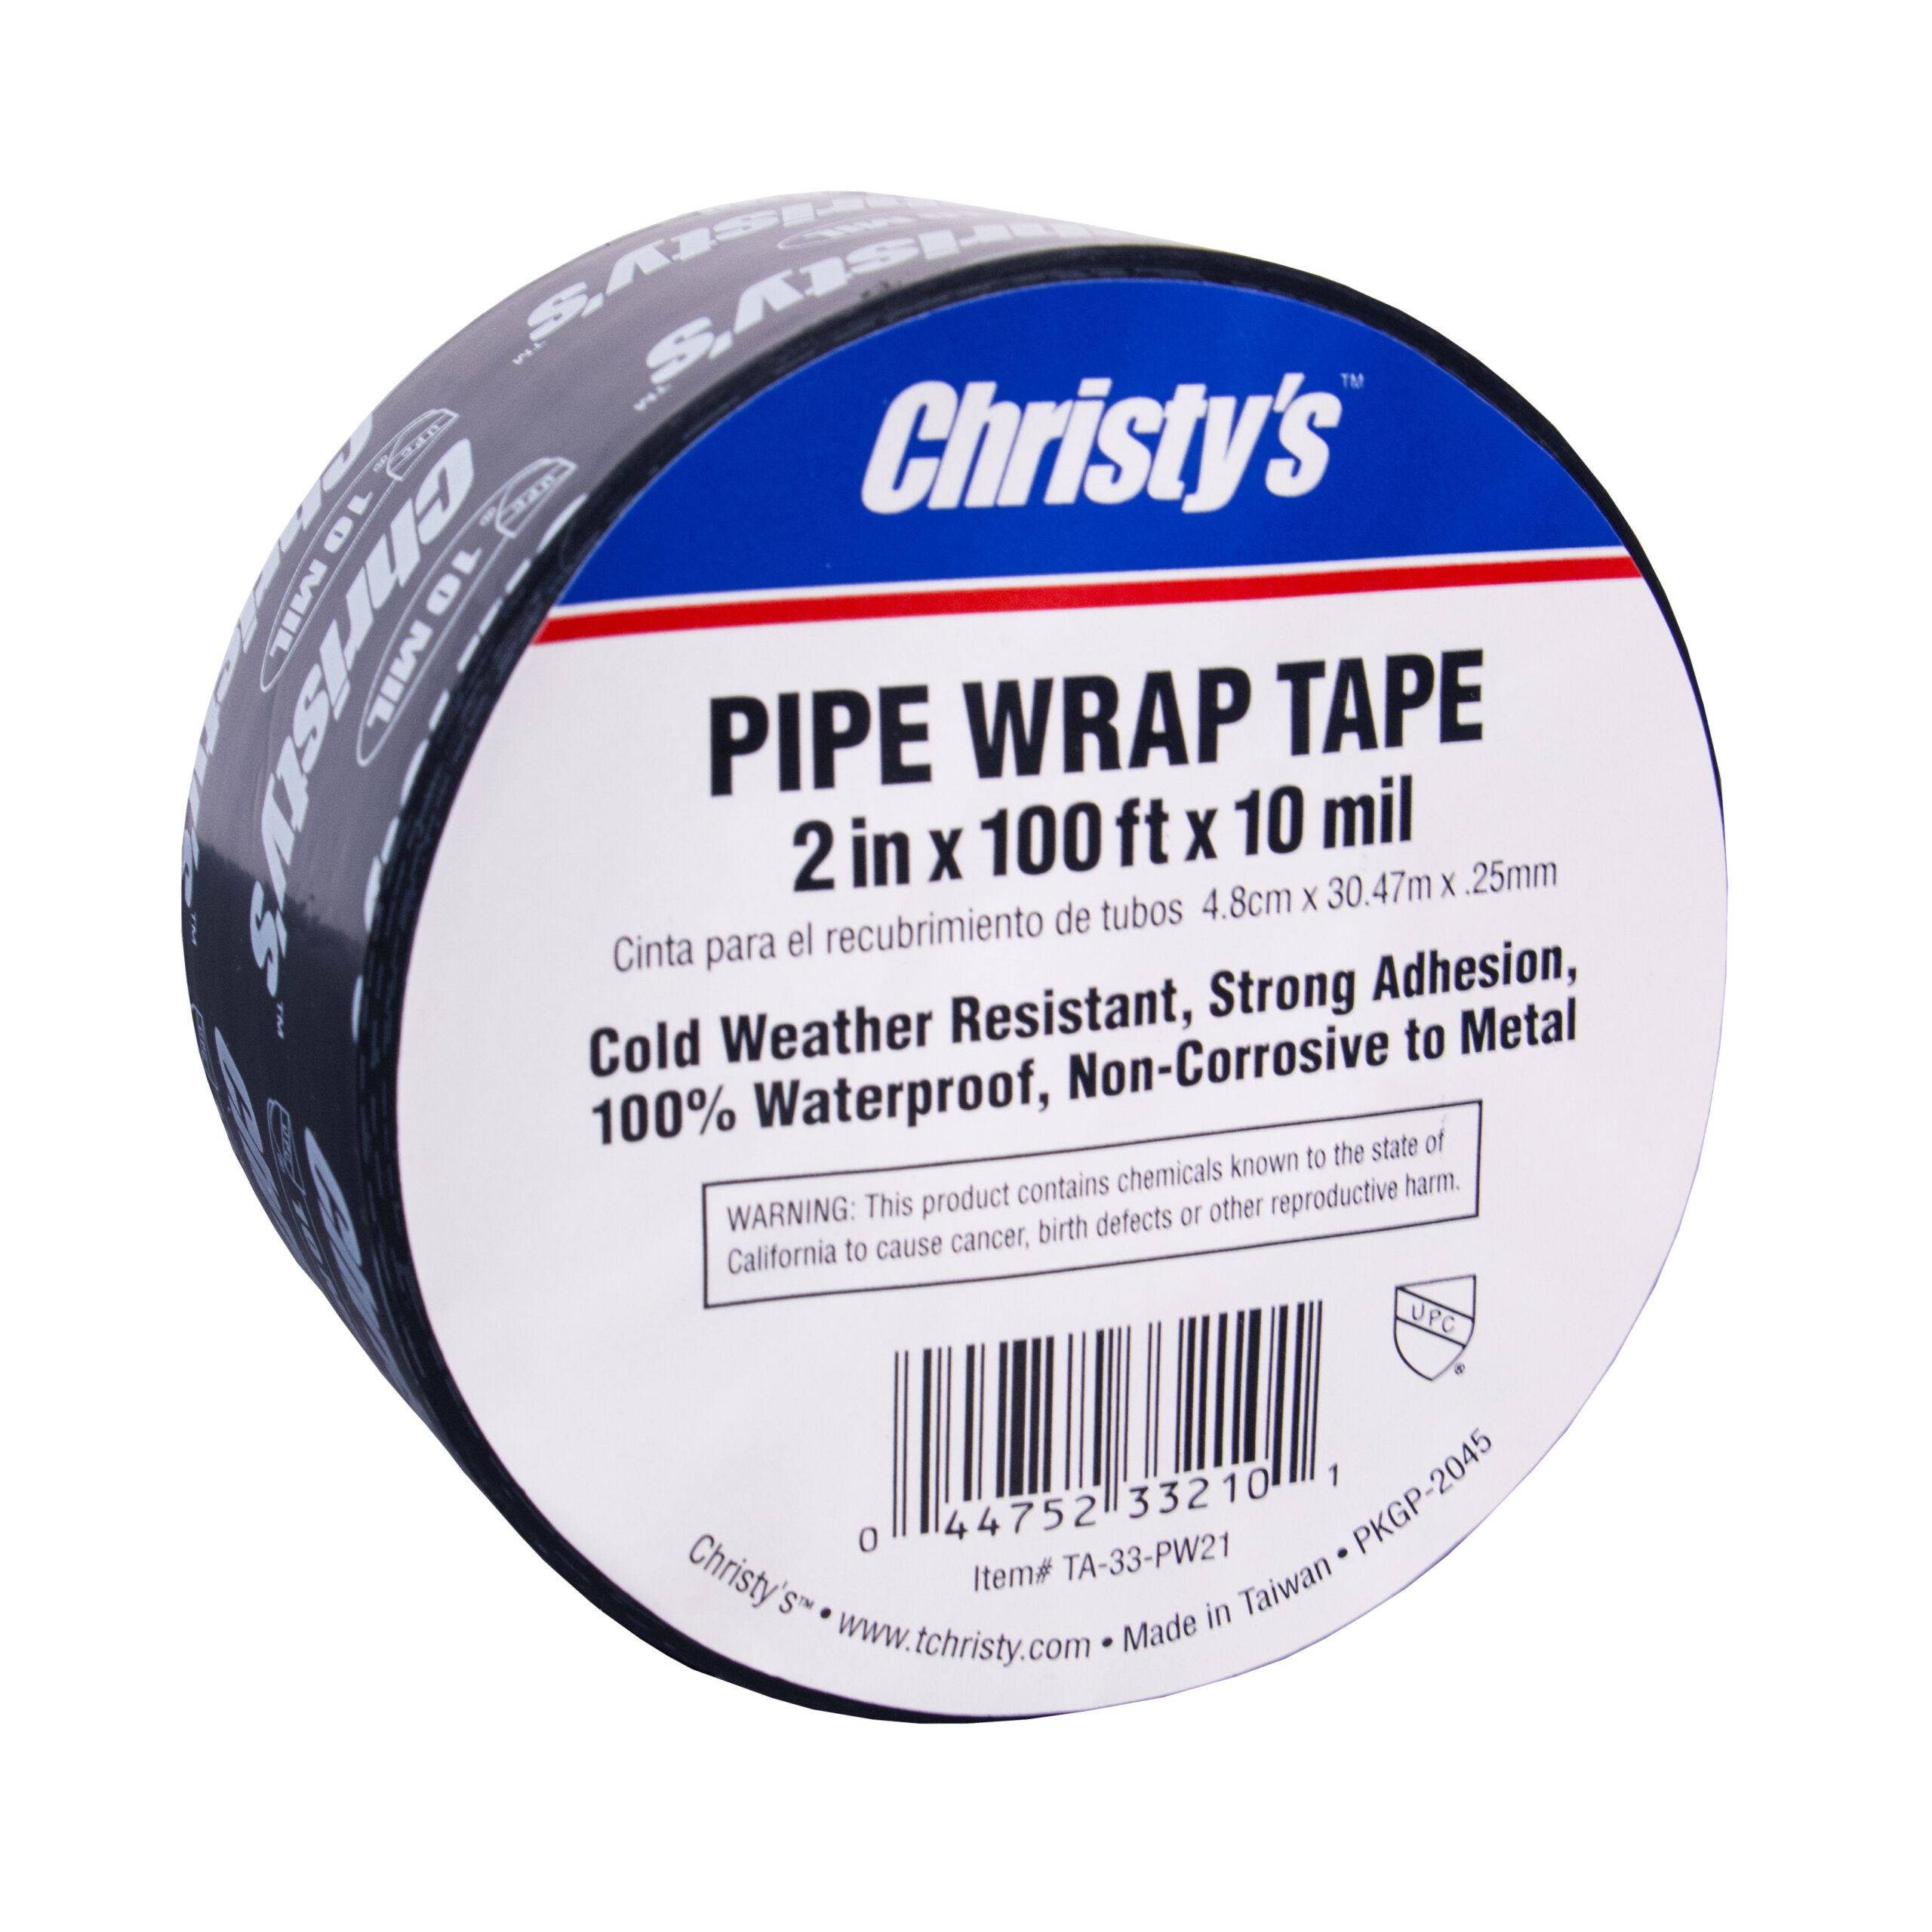 Pipe Wrap 2 Wide x 100'; 10 mil Thick - Christy's